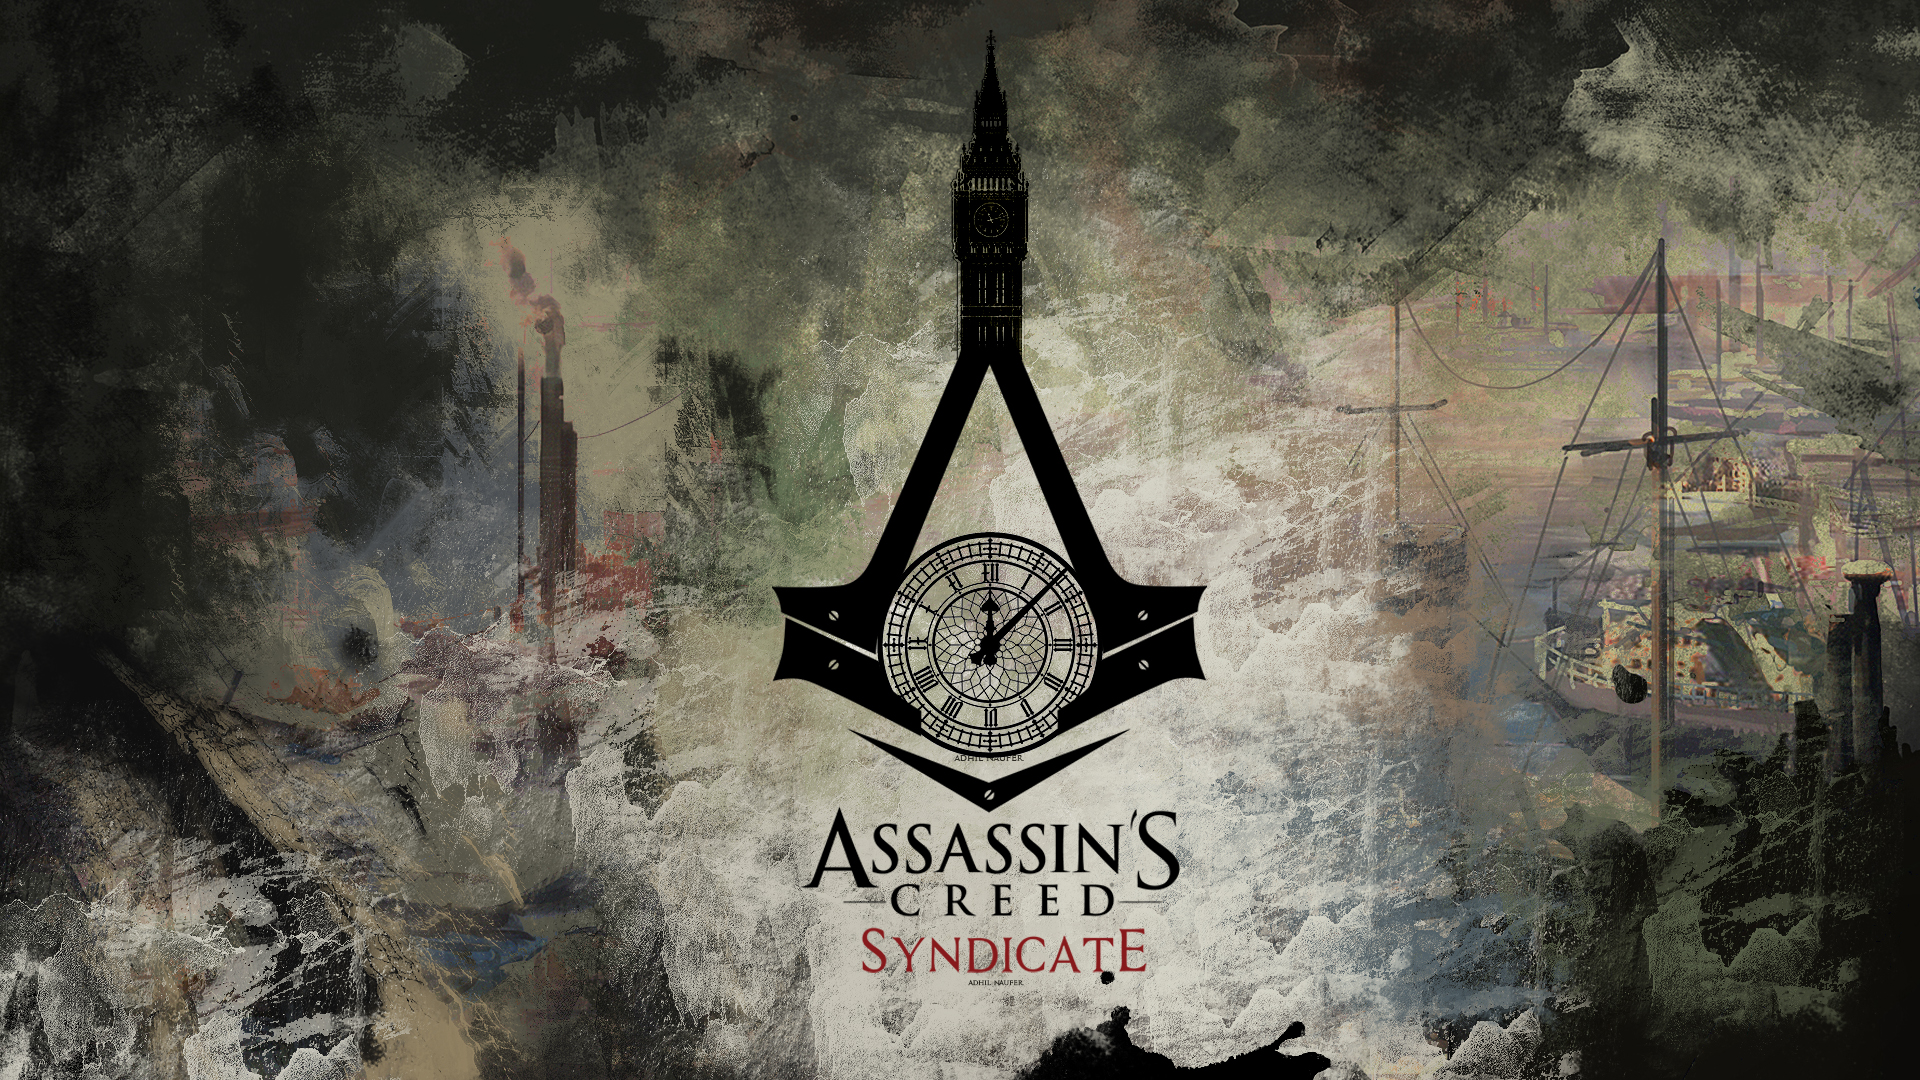 assassin's creed: syndicate, assassin's creed, video game, logo